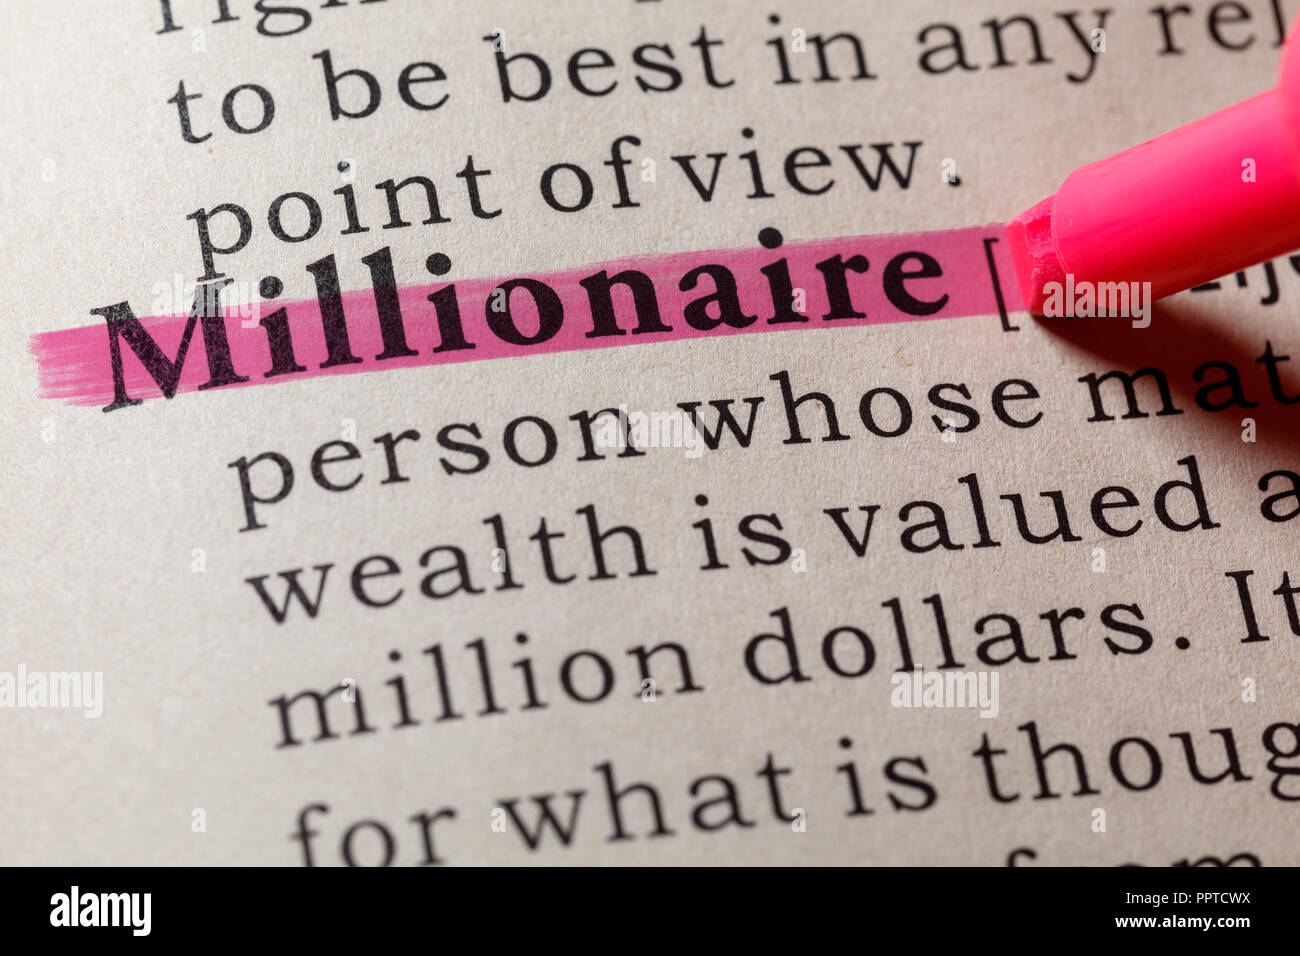 Fake Dictionary, Dictionary definition of the word Millionaire. including key descriptive words. Stock Photo